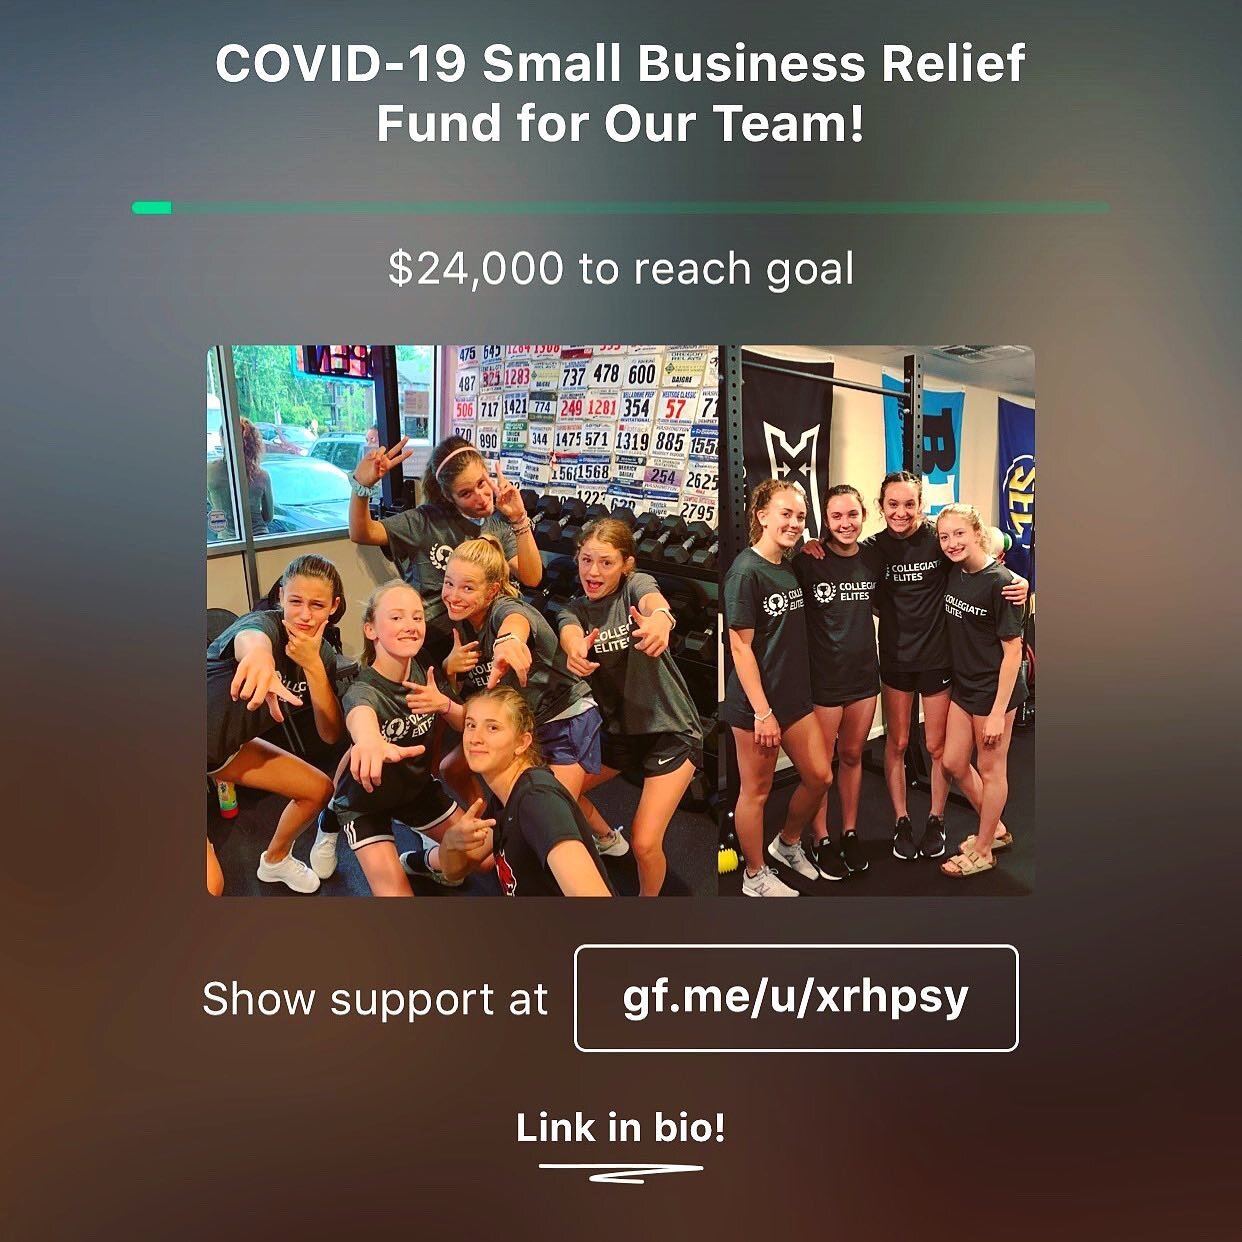 If you have a moment &amp; are able, please help support our team through these tough times as our business of helping young athletes is impacted &amp; our doors are closed. ❤️ #supportsmallbusiness #covid_19 #anythinghelps #athlete #support #collegi